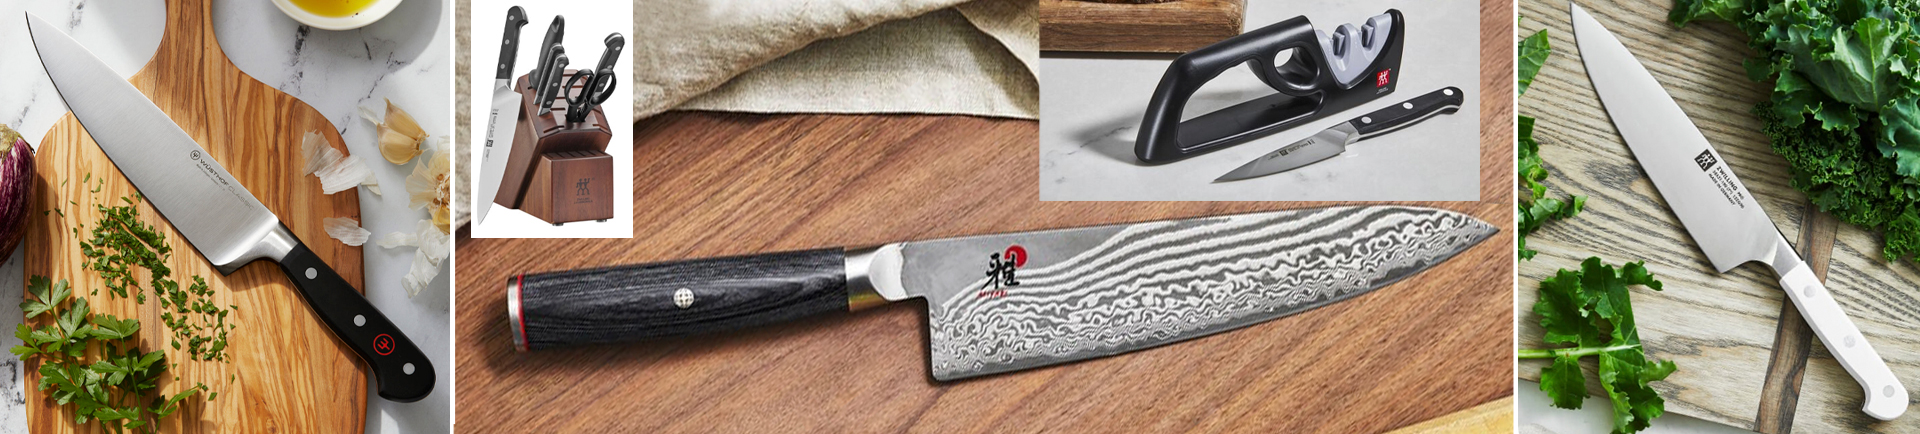 Cutlery & Knife Accessories Banner